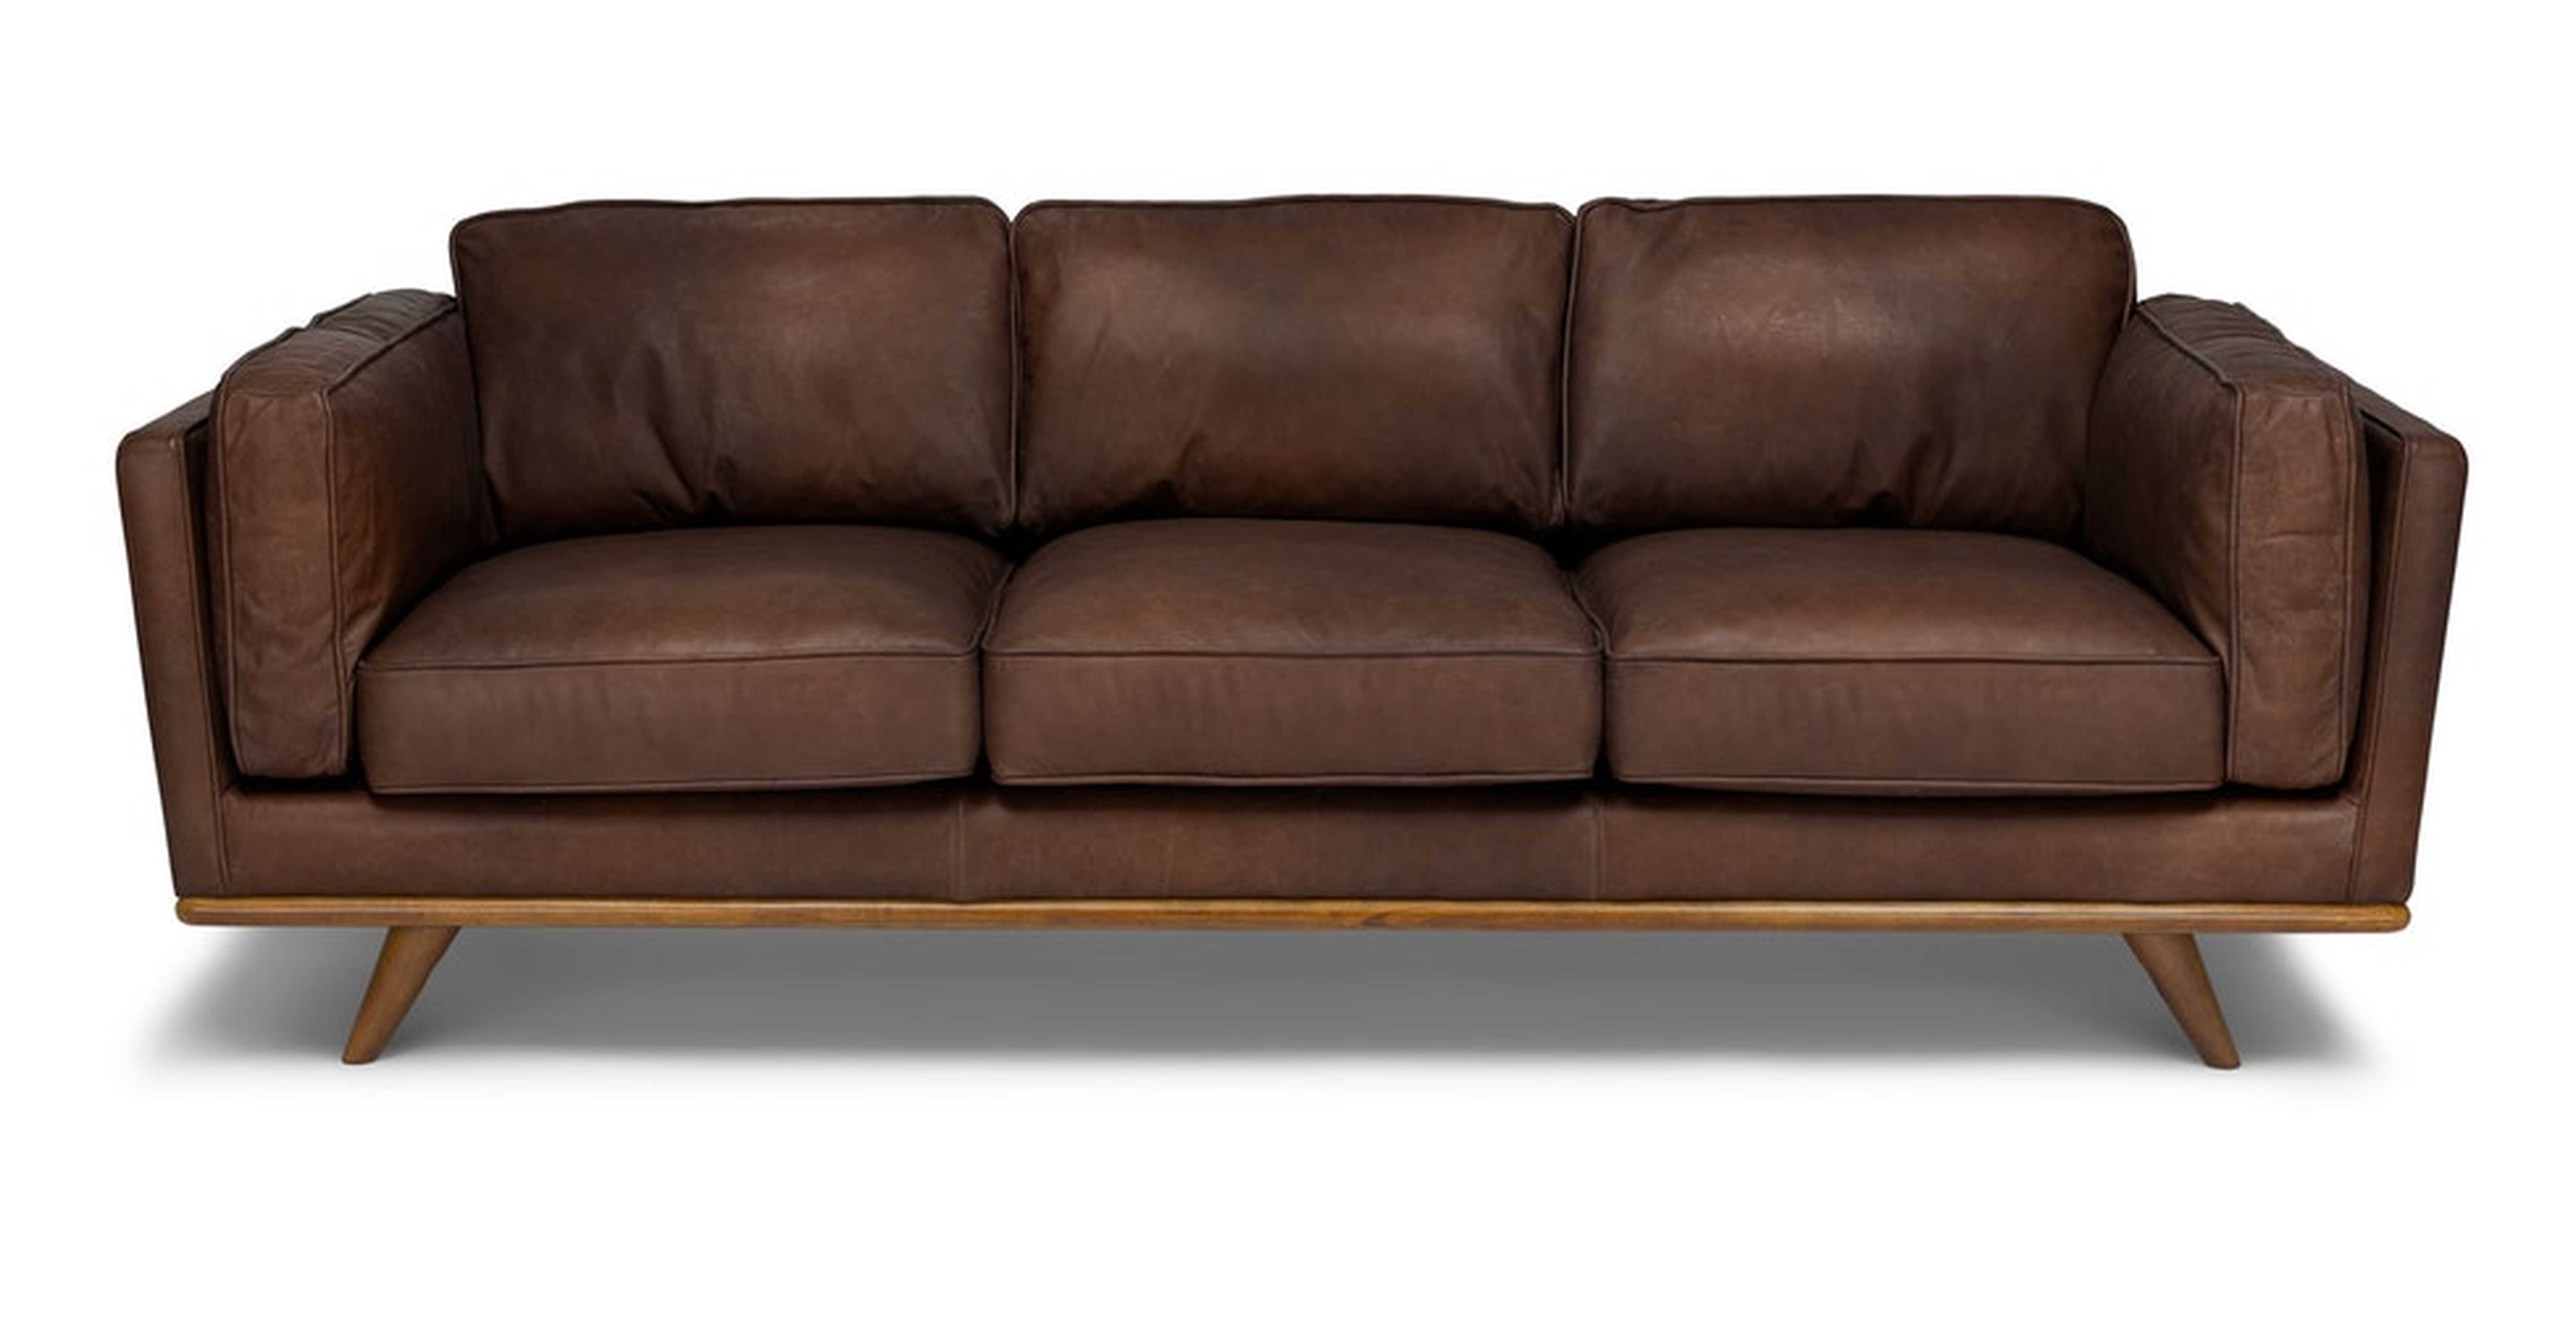 Timber 90" Leather Sofa - Charme Chocolat - Article